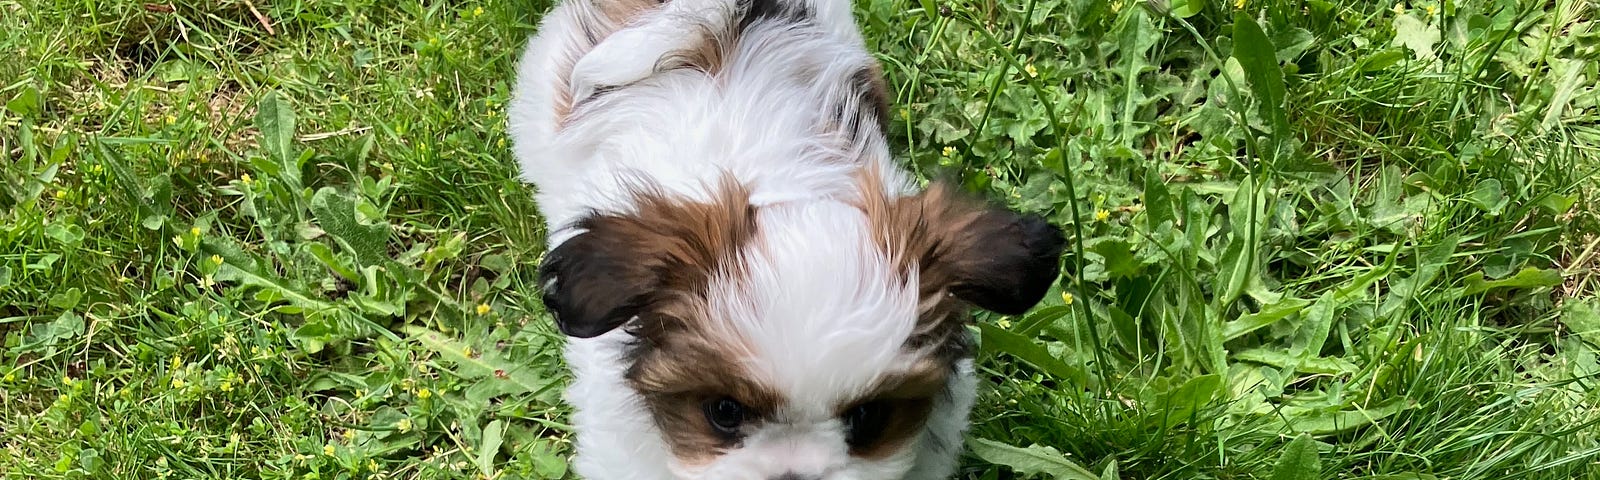 small dog on lawn